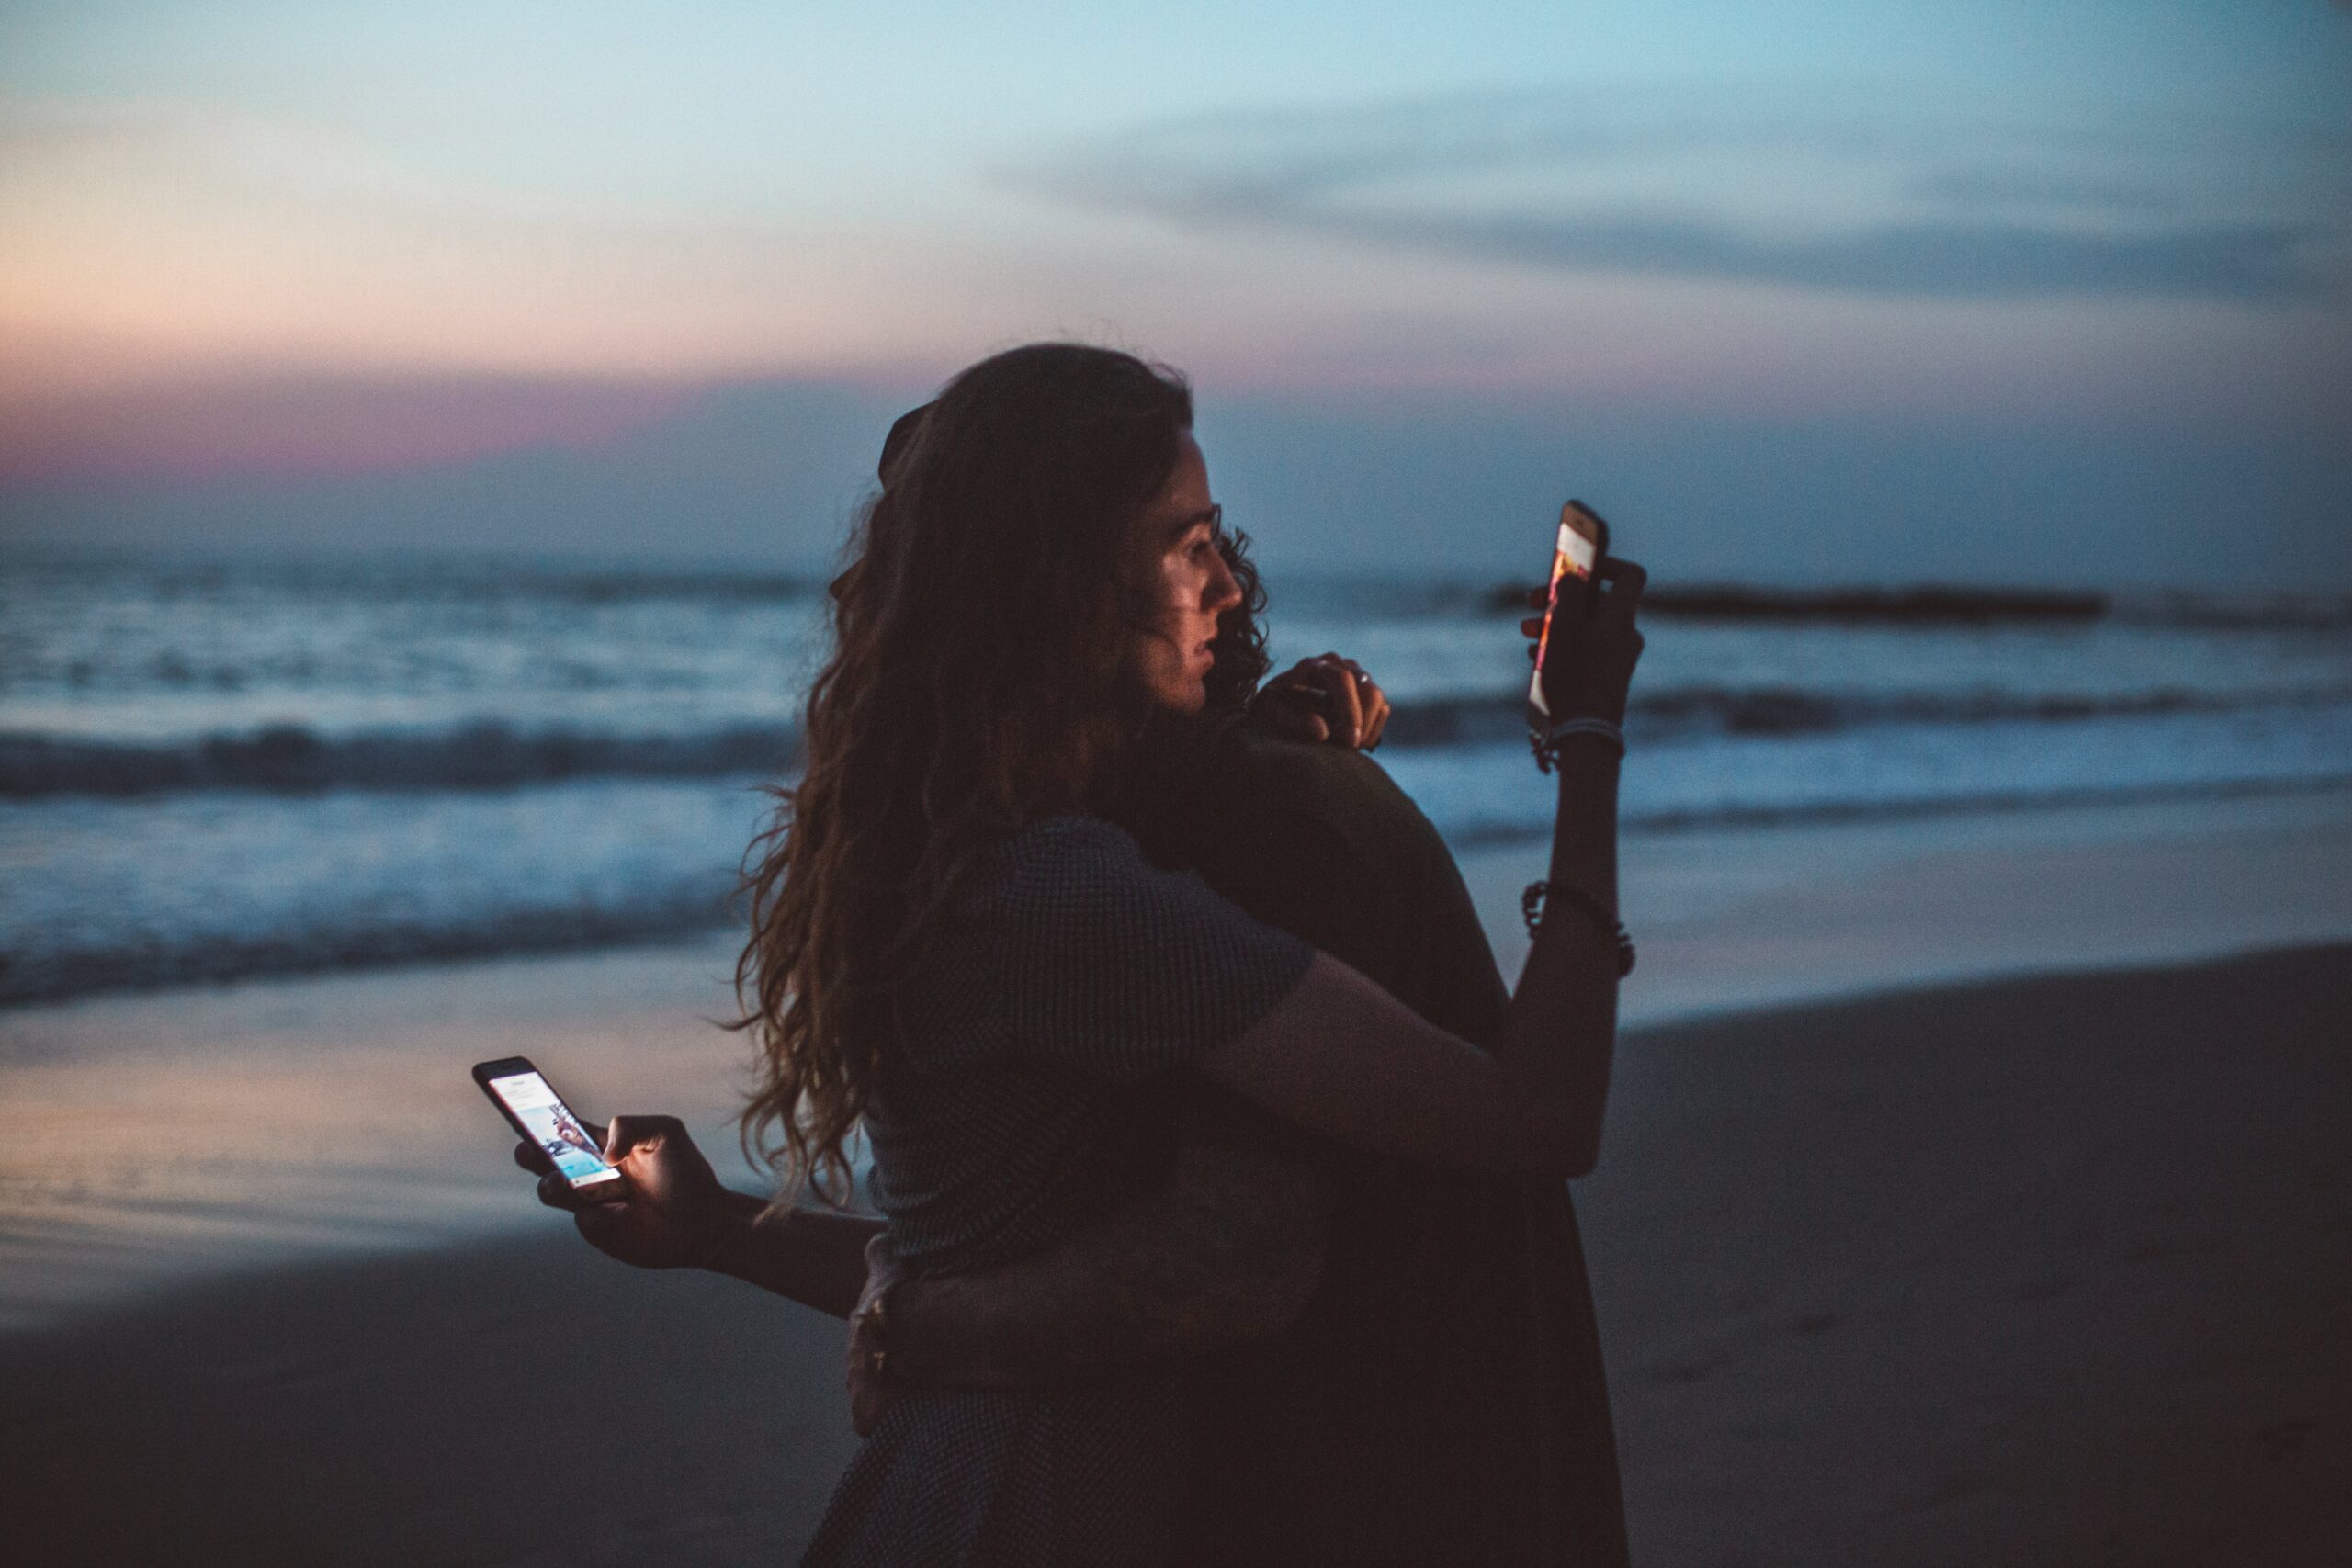 Behind the Photo: Rethinking Relationship Visibility in the Digital Age